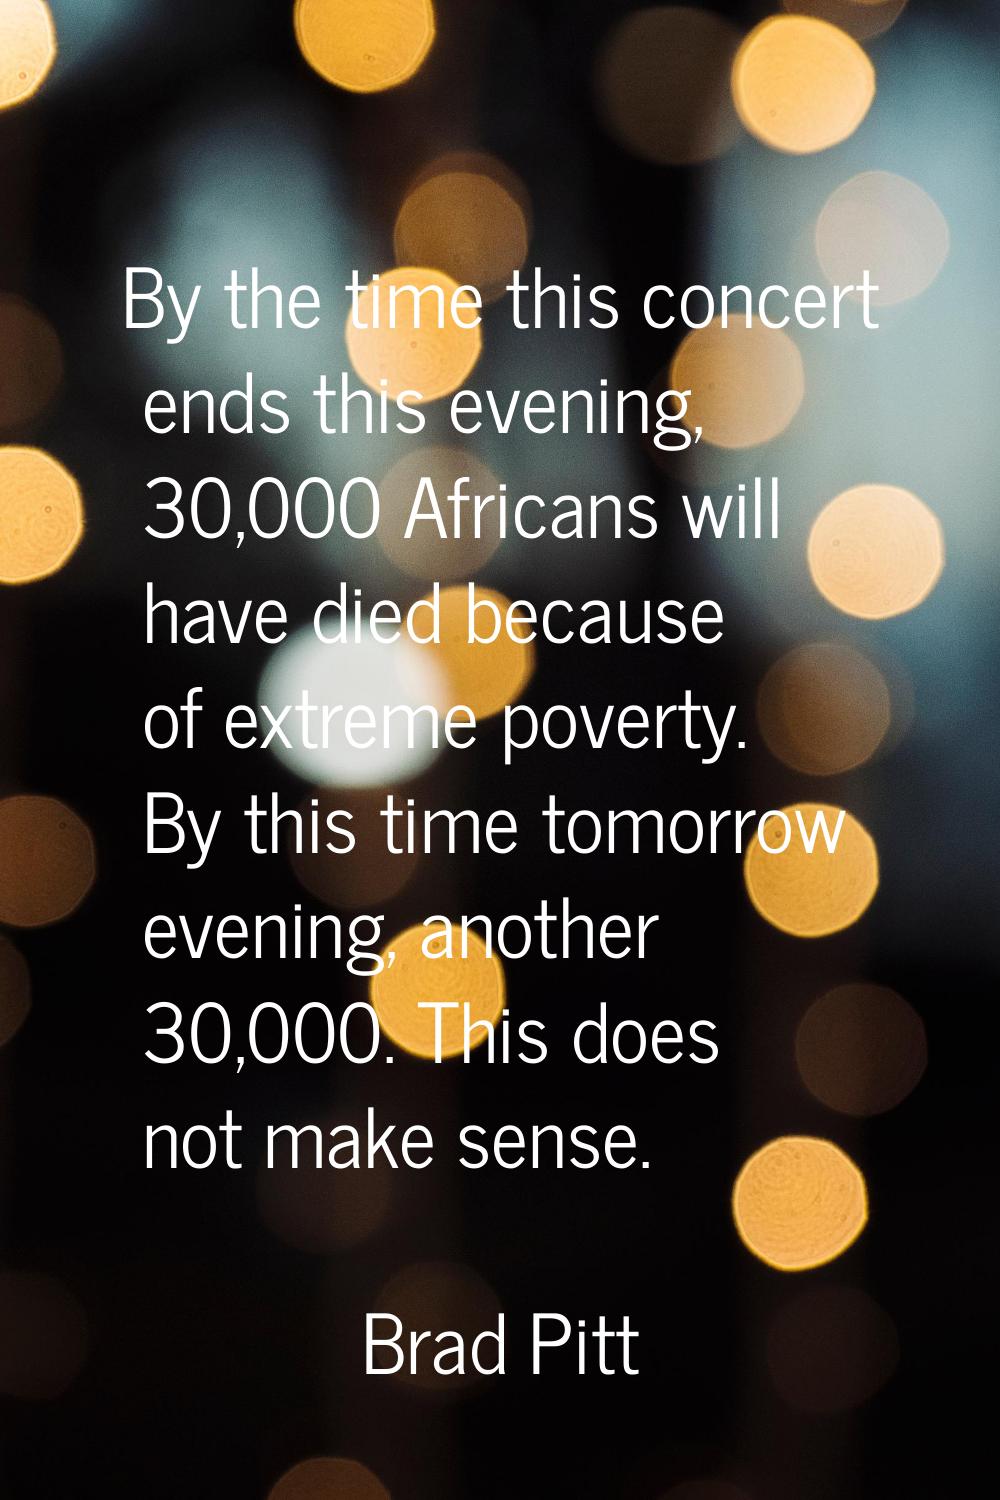 By the time this concert ends this evening, 30,000 Africans will have died because of extreme pover